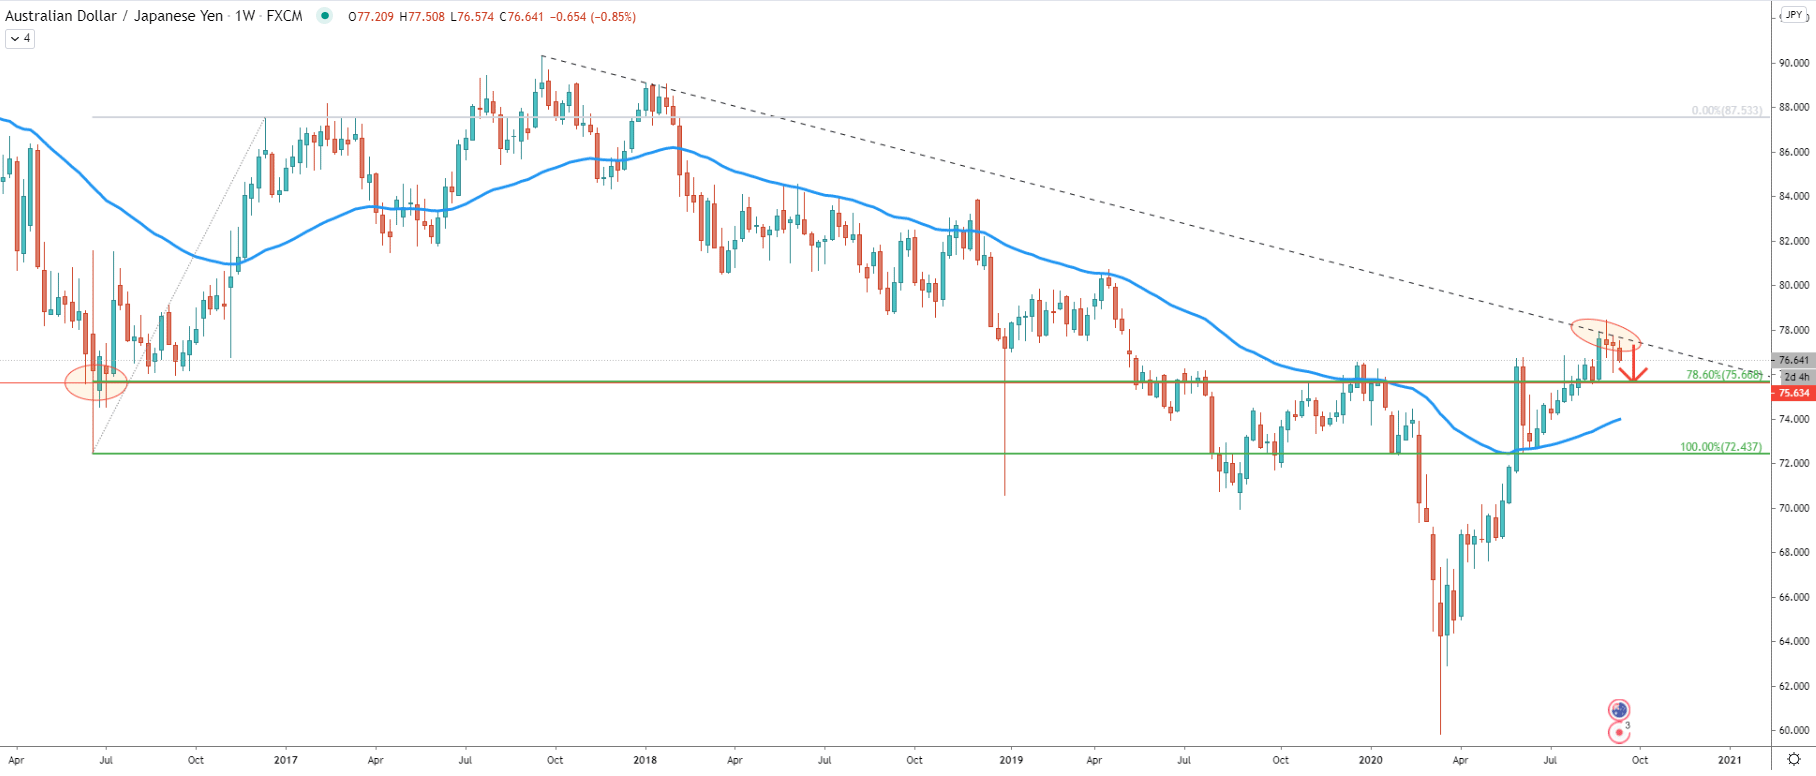 AUD/JPY Weekly Technical Analysis 16 Sep 2020